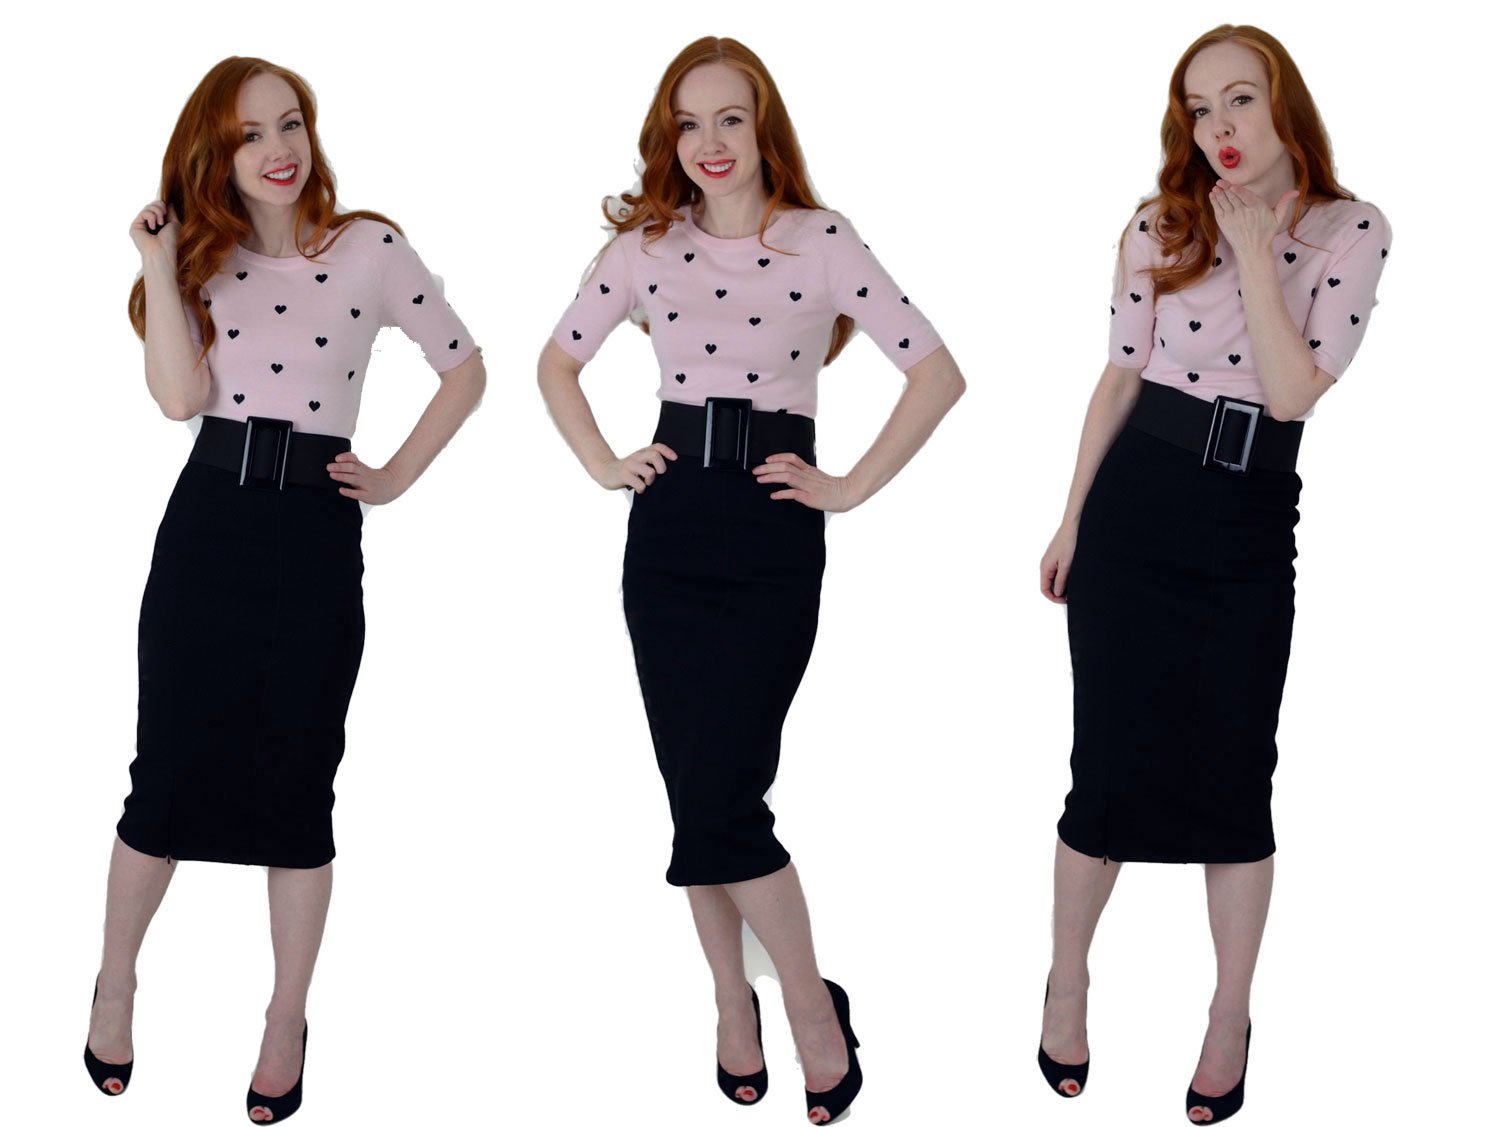 50s-inspired outfit featuring black pencil skirt and fitted top